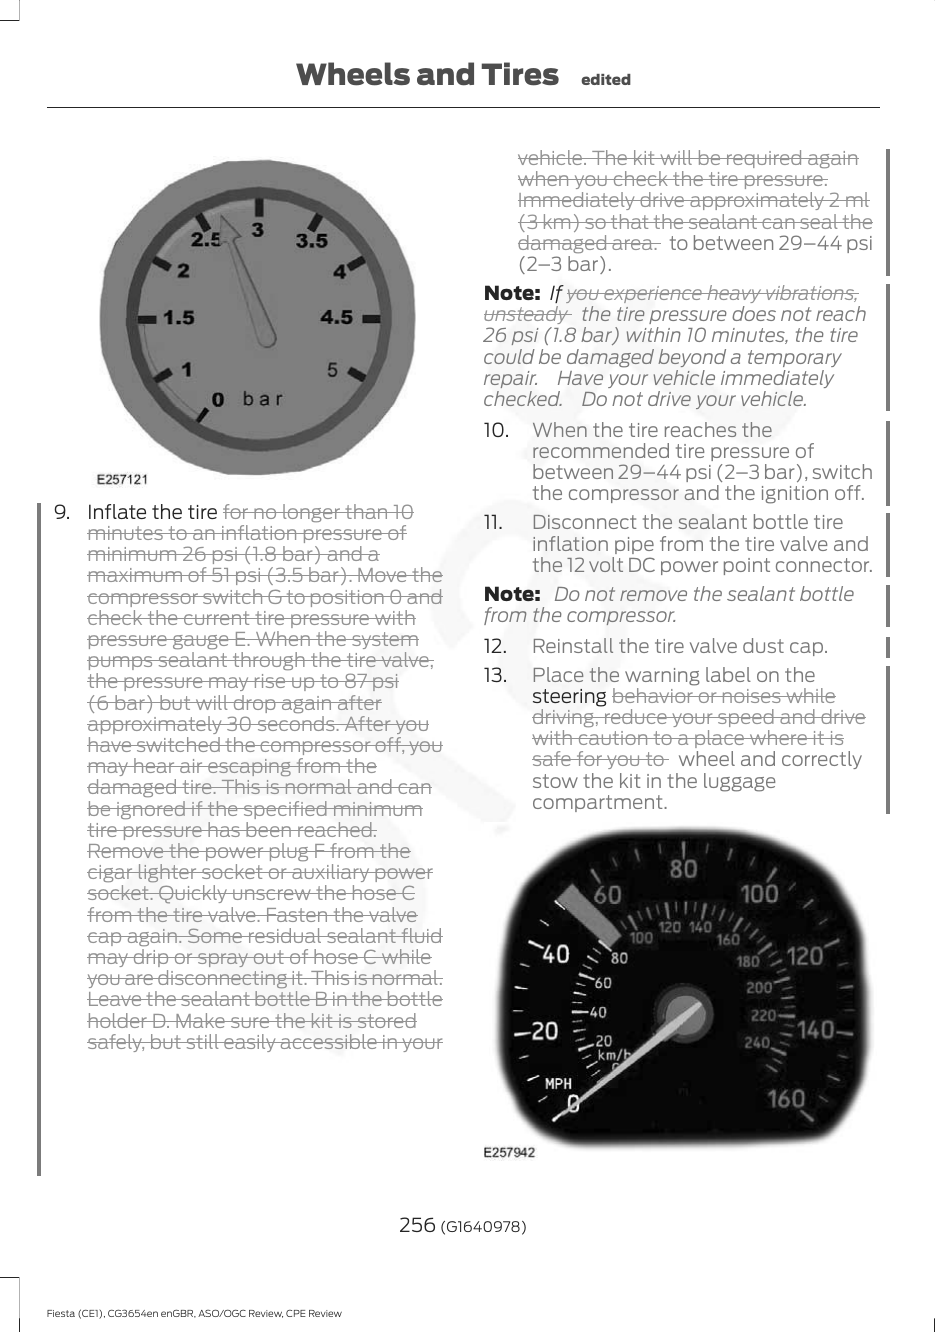 9. Inflate the tire for no longer than 10minutes to an inflation pressure ofminimum 26 psi (1.8 bar) and amaximum of 51 psi (3.5 bar). Move thecompressor switch G to position 0 andcheck the current tire pressure withpressure gauge E. When the systempumps sealant through the tire valve,the pressure may rise up to 87 psi(6 bar) but will drop again afterapproximately 30 seconds. After youhave switched the compressor off, youmay hear air escaping from thedamaged tire. This is normal and canbe ignored if the specified minimumtire pressure has been reached.Remove the power plug F from thecigar lighter socket or auxiliary powersocket. Quickly unscrew the hose Cfrom the tire valve. Fasten the valvecap again. Some residual sealant fluidmay drip or spray out of hose C whileyou are disconnecting it. This is normal.Leave the sealant bottle B in the bottleholder D. Make sure the kit is storedsafely, but still easily accessible in yourvehicle. The kit will be required againwhen you check the tire pressure.Immediately drive approximately 2 ml(3 km) so that the sealant can seal thedamaged area. to between 29–44 psi(2–3 bar).Note:  If you experience heavy vibrations,unsteady  the tire pressure does not reach26 psi (1.8 bar) within 10 minutes, the tirecould be damaged beyond a temporaryrepair.  Have your vehicle immediatelychecked.  Do not drive your vehicle.10. When the tire reaches therecommended tire pressure ofbetween 29–44 psi (2–3 bar), switchthe compressor and the ignition off.11. Disconnect the sealant bottle tireinflation pipe from the tire valve andthe 12 volt DC power point connector.Note:  Do not remove the sealant bottlefrom the compressor.12. Reinstall the tire valve dust cap.13. Place the warning label on thesteering behavior or noises whiledriving, reduce your speed and drivewith caution to a place where it issafe for you to  wheel and correctlystow the kit in the luggagecompartment.256 (G1640978)Fiesta (CE1), CG3654en enGBR, ASO/OGC Review, CPE ReviewWheels and Tires edited